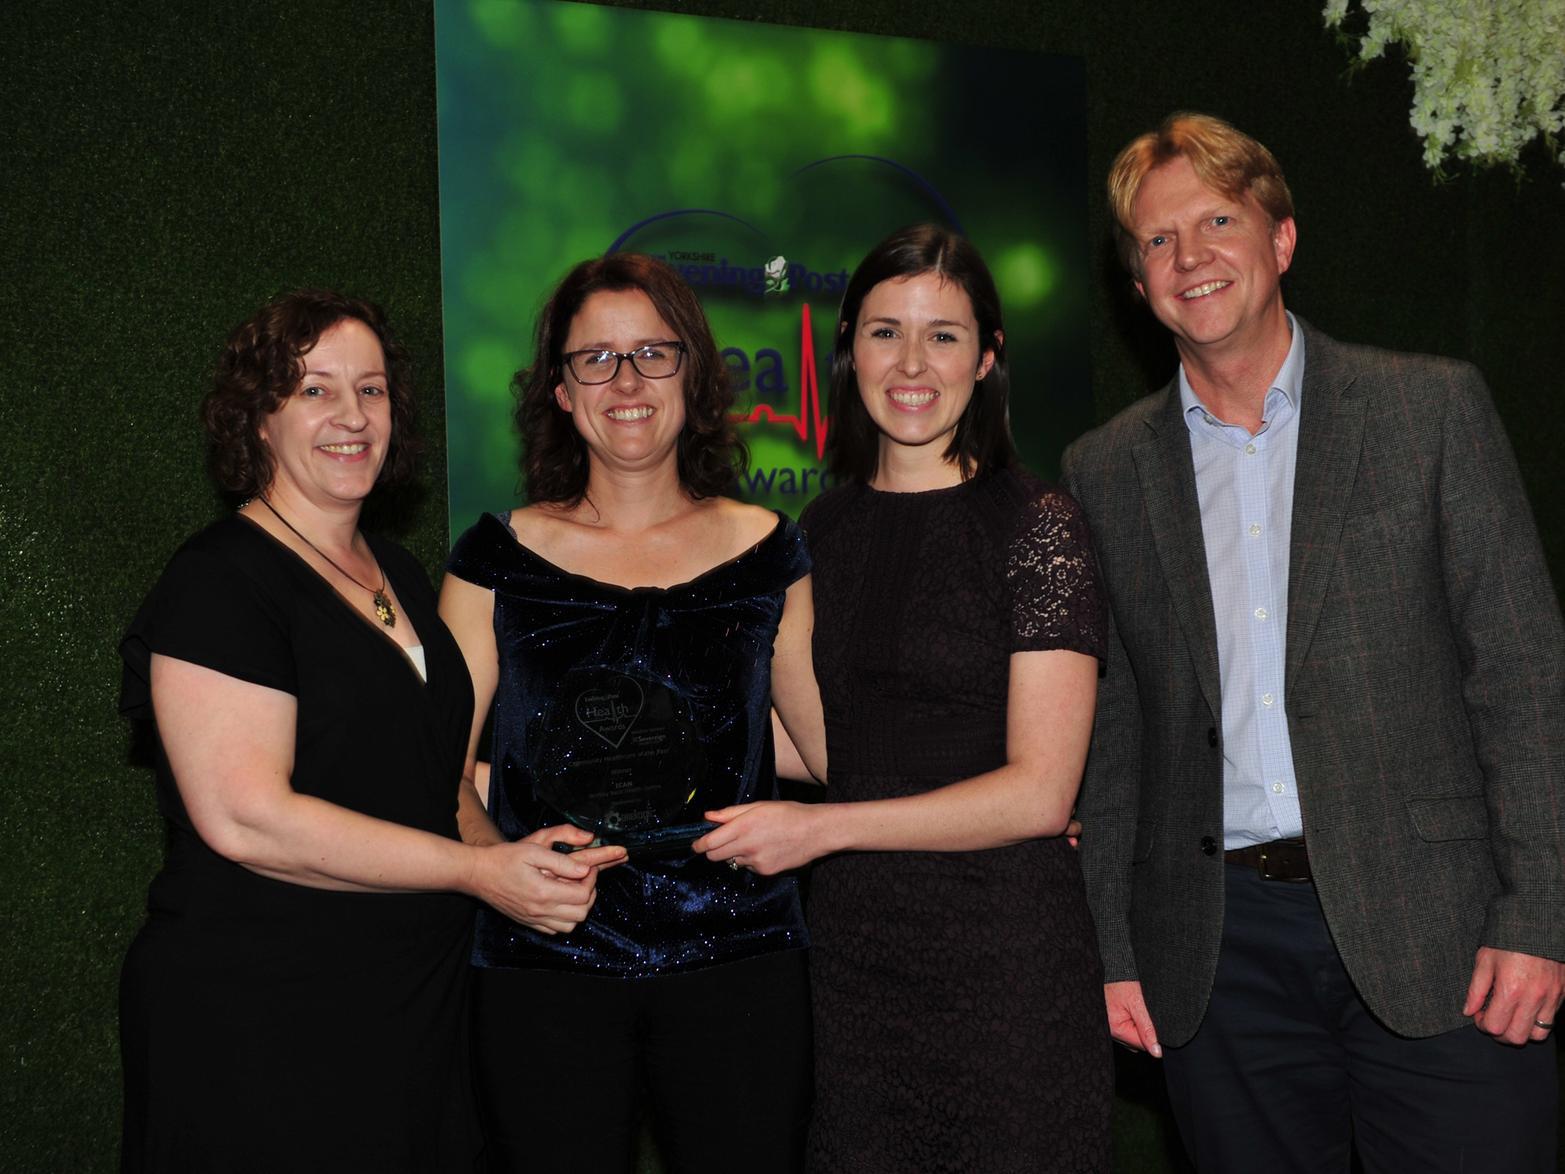 The team from the Integrated Childrens Additional Needs Team (ICAN), based at the Wortley Beck Health Centre, of Leeds Community Healthcare NHS Trust, win Community Healthcare Award